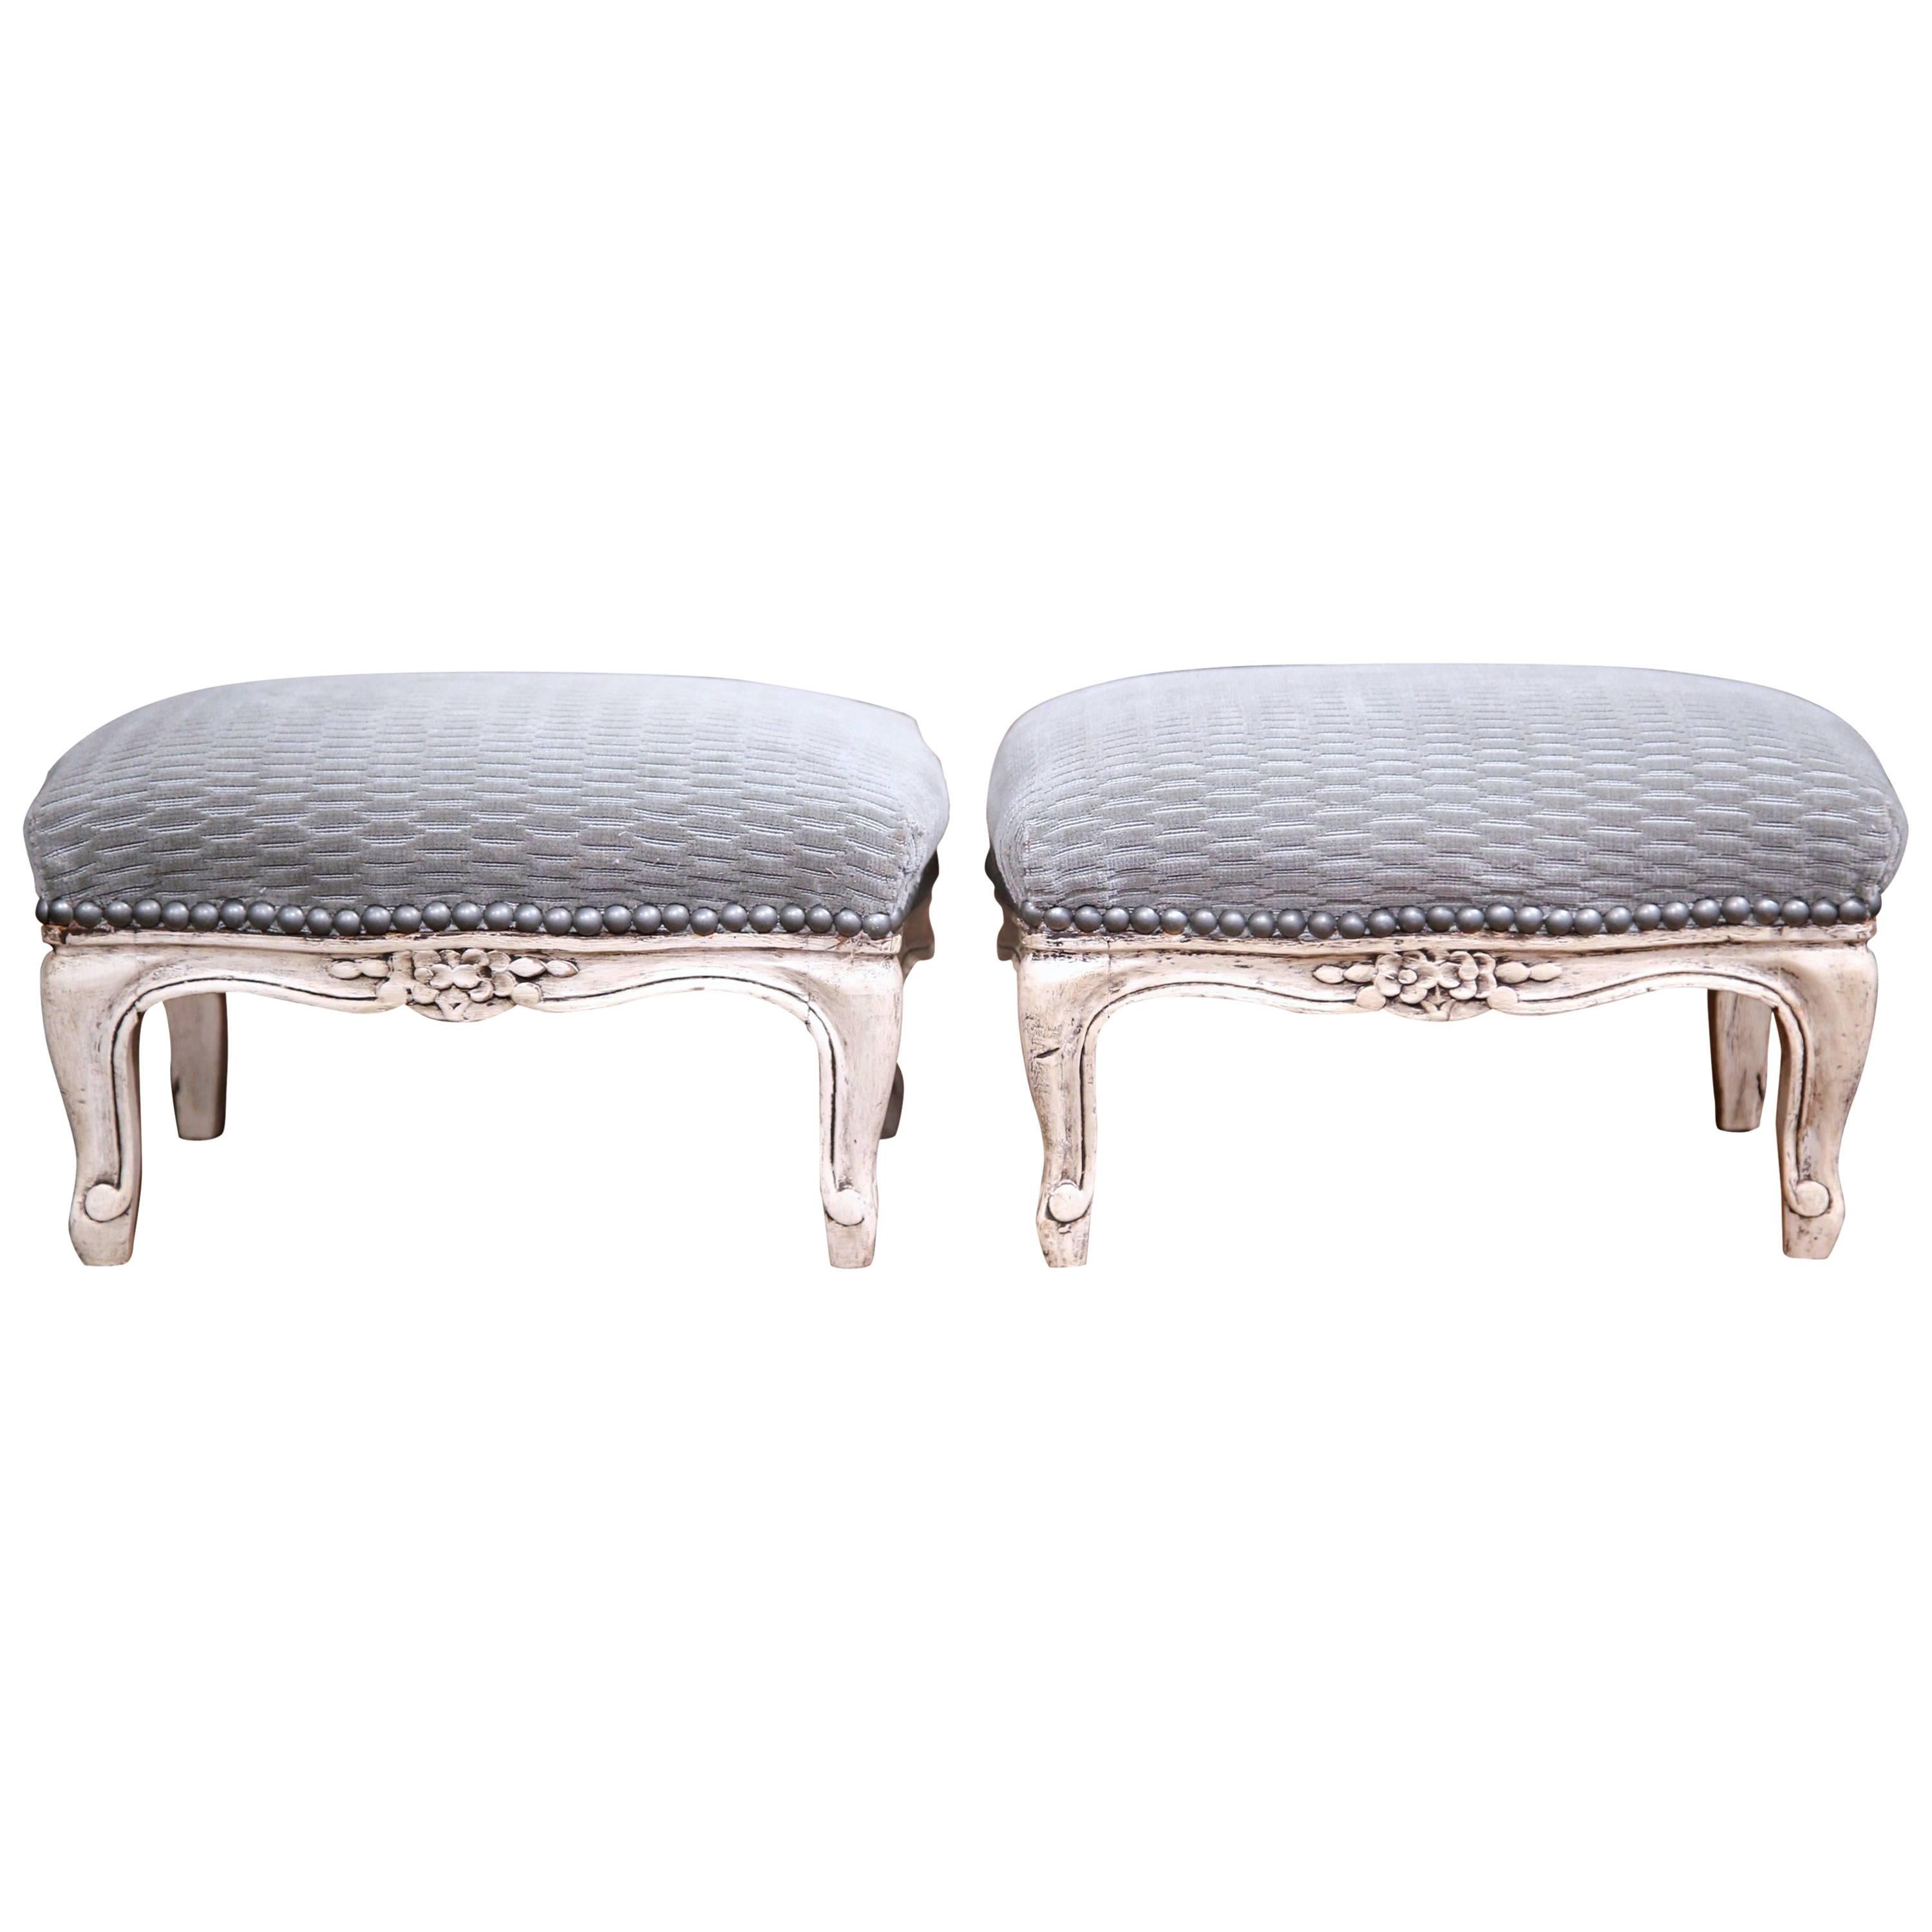 Pair of Late 19th Century French Louis XV Carved Painted Footstools with Velvet